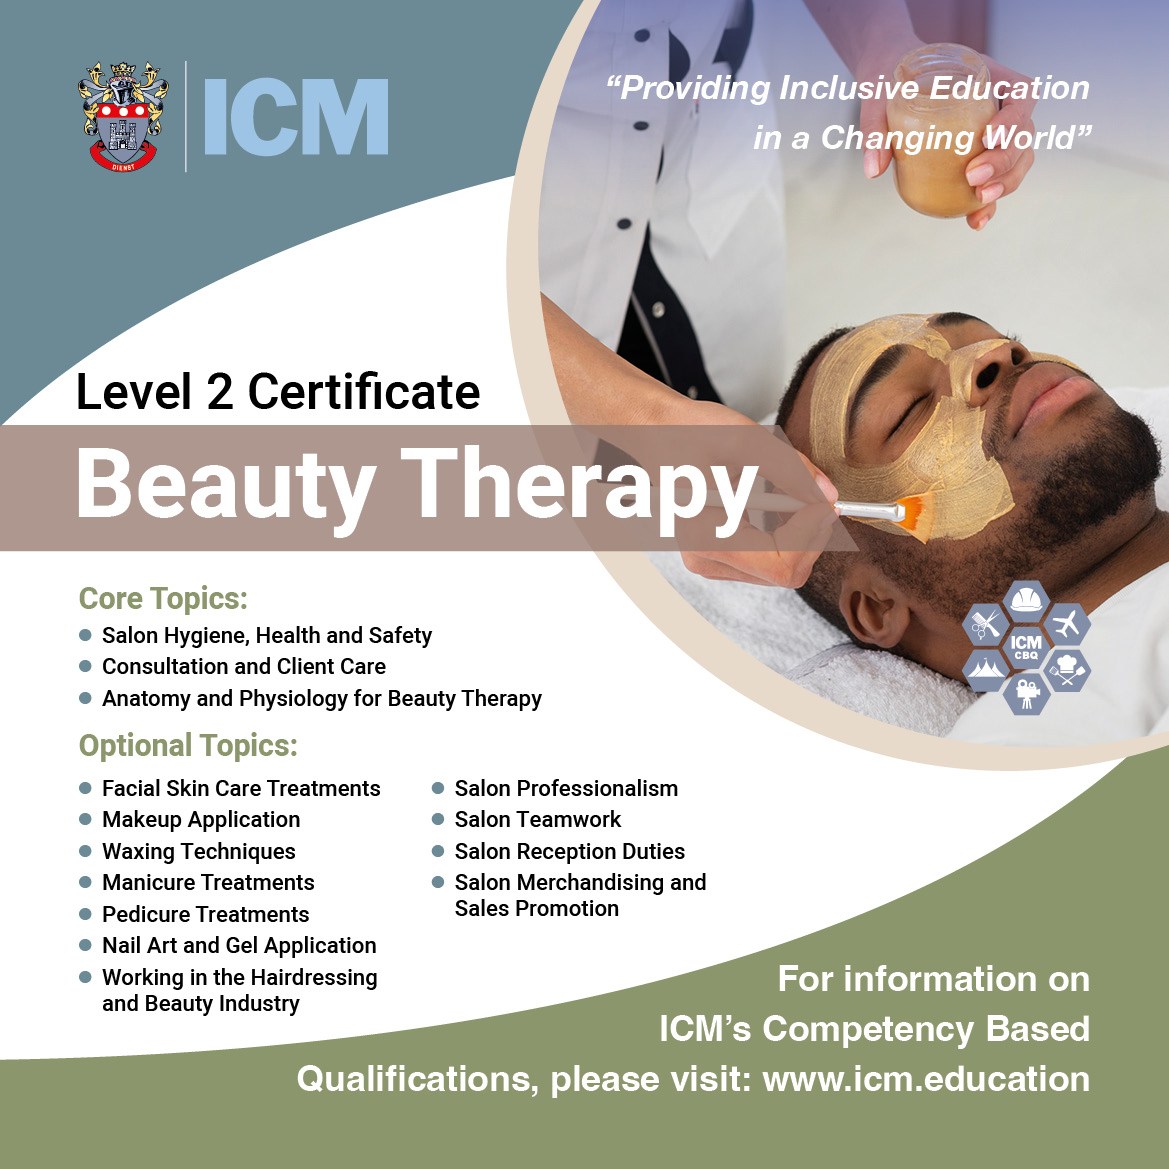 Are you looking for an assessment based qualification in beauty therapy?
Check out details of our Level 2 Certificate in Beauty Therapy Competency Based Qualification on our website:
icm.education/competency-bas…
#BeautyTherapy #Level2 #Certificate #CompetencyBasedQualification #ICM